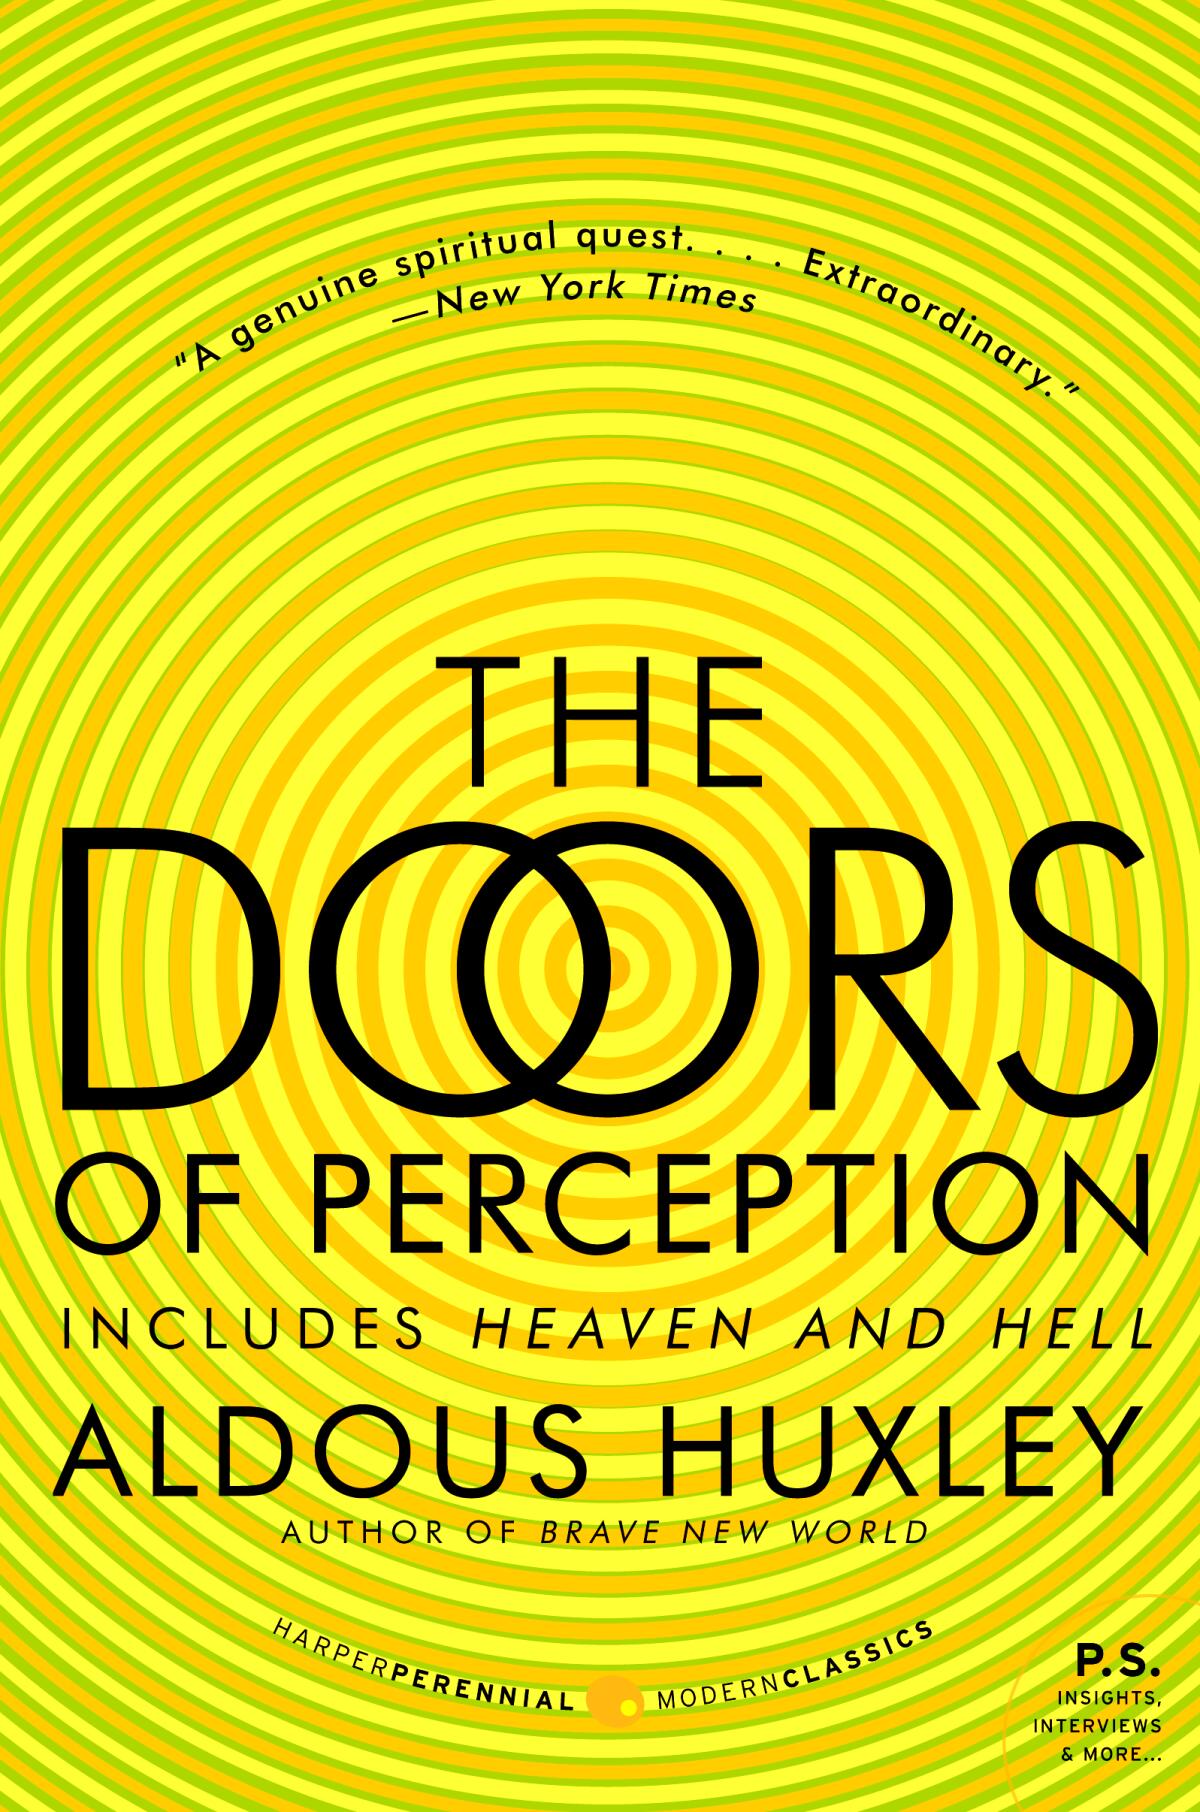 'The Doors of Perception,' by Aldous Huxley